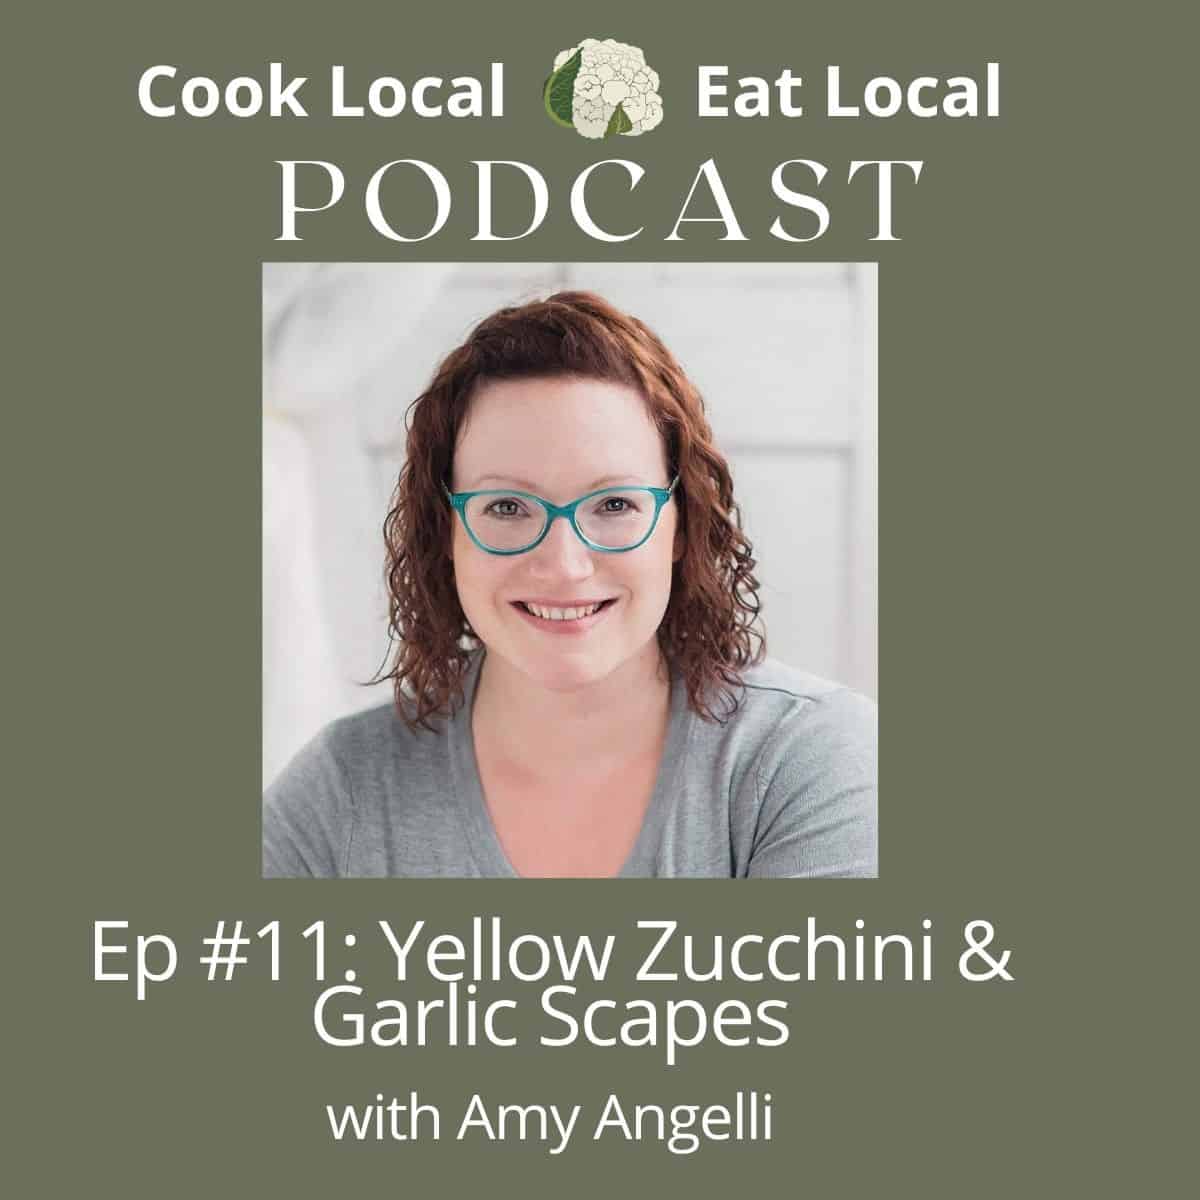 podcast cover graphic with a photo of Amy Angelli and green background, with text that says Cook Local Eat Local Podcast, Episode 11, Yellow Zucchini and Garlic Scapes.